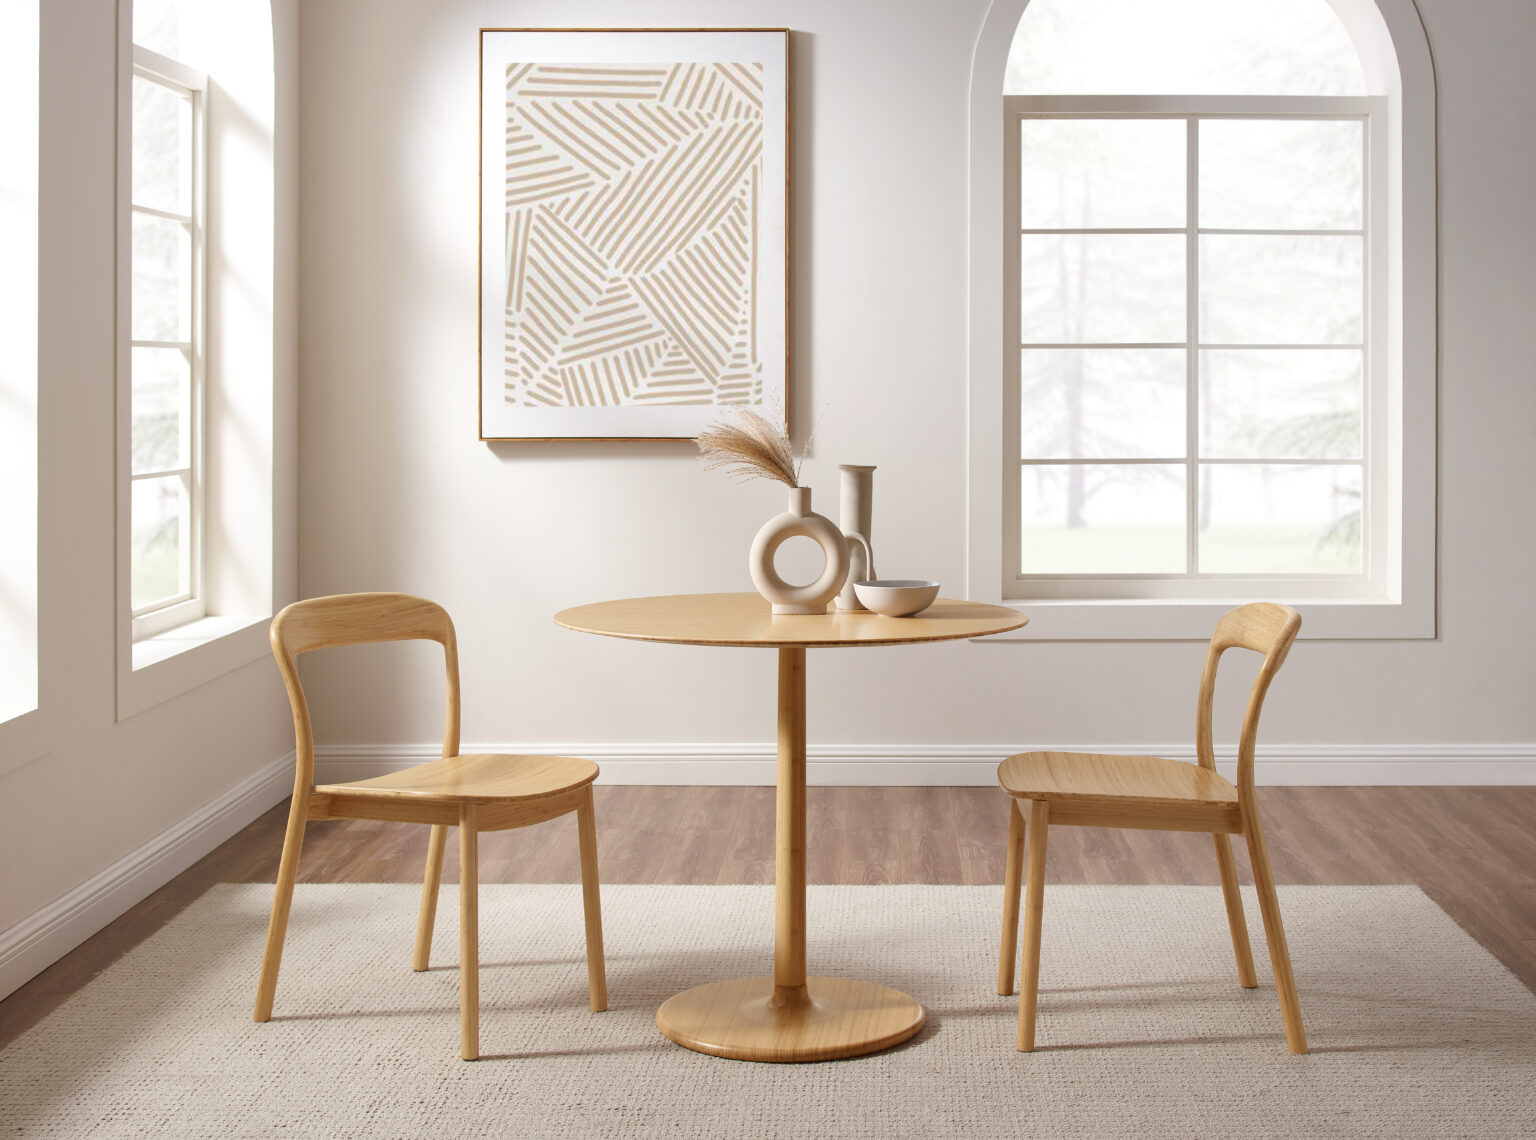 Hanna-round-dining-table-and-hanna-dining-chair-bamboo-seat-wheat-bamboo_lifestyle_greenington